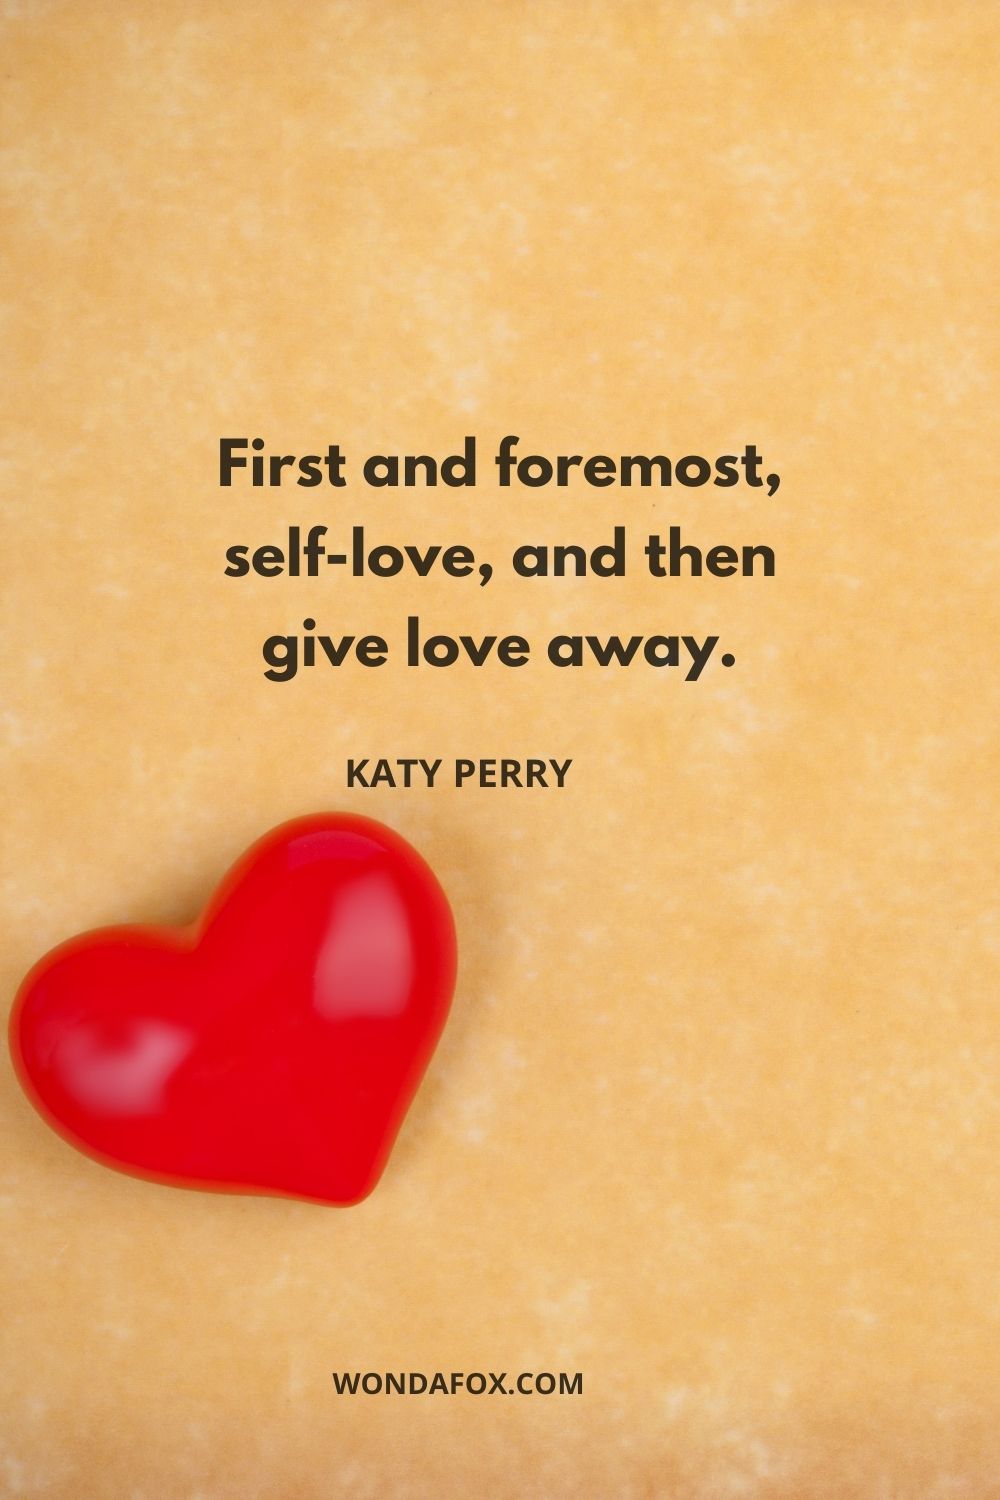 First and foremost, self-love, and then give love away.